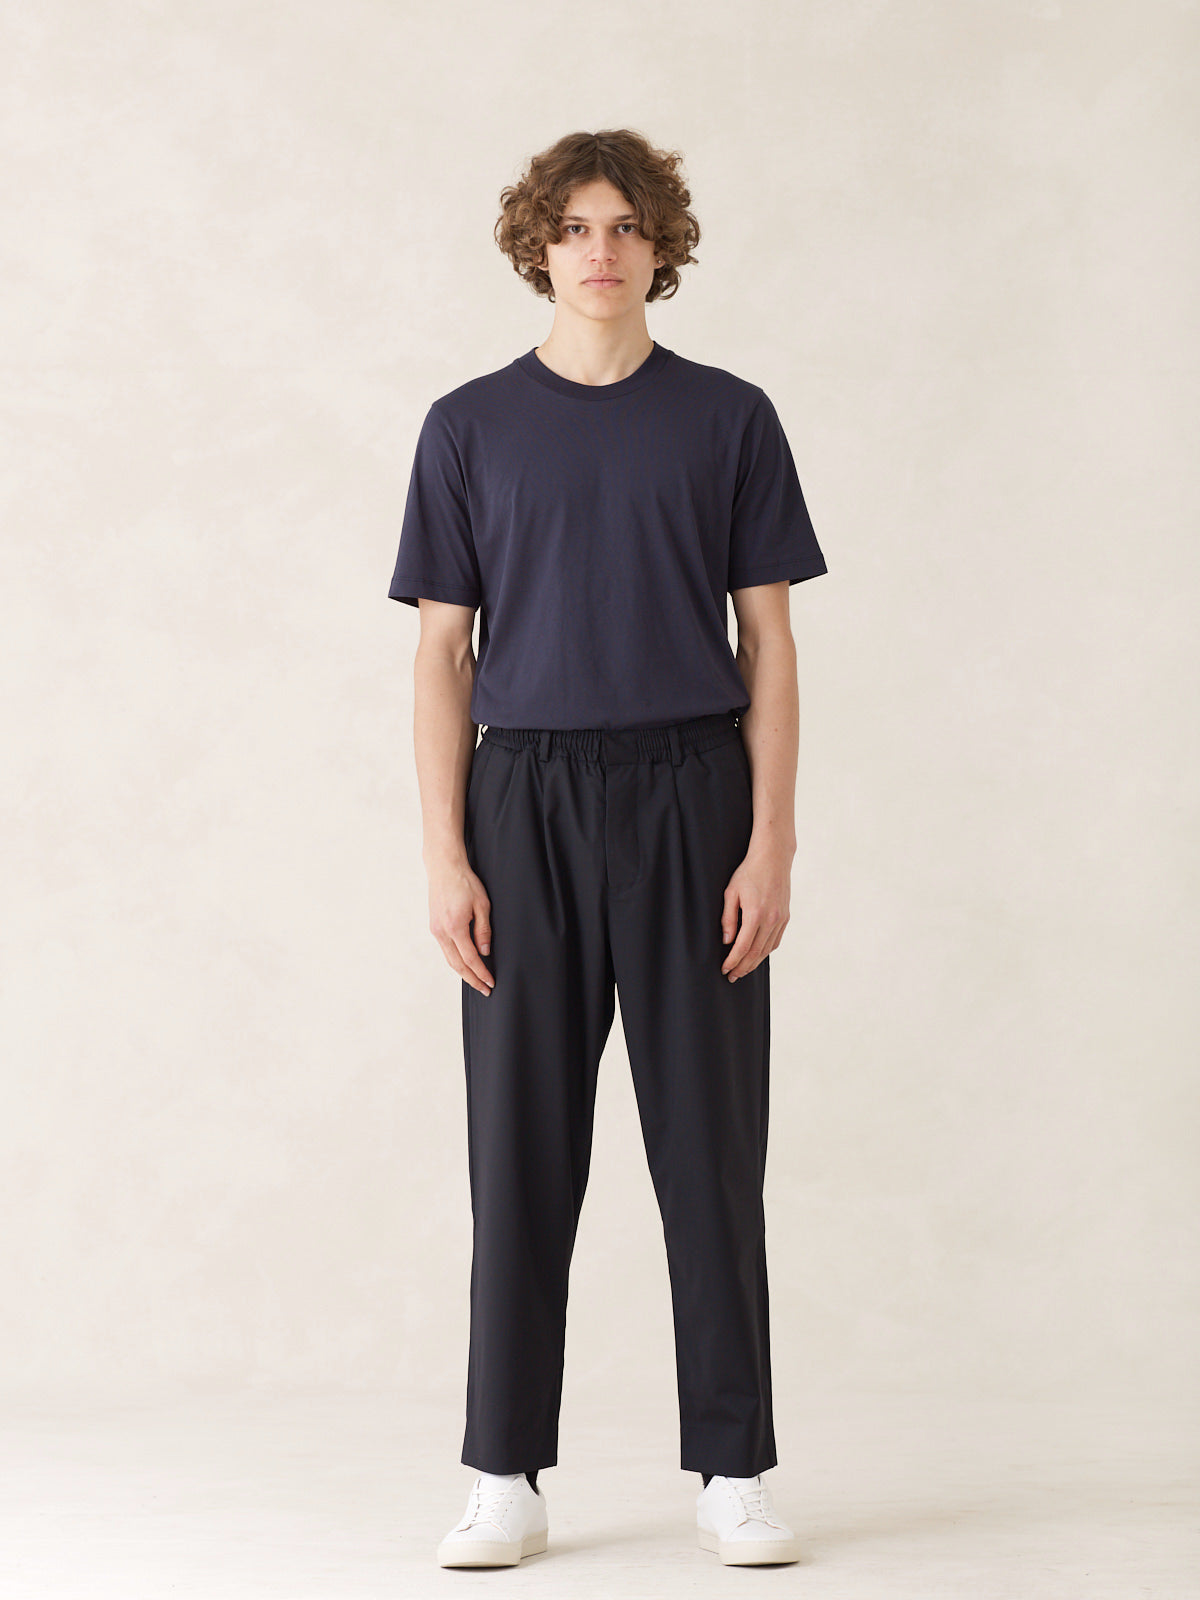 08 / Pleated Trousers Navy